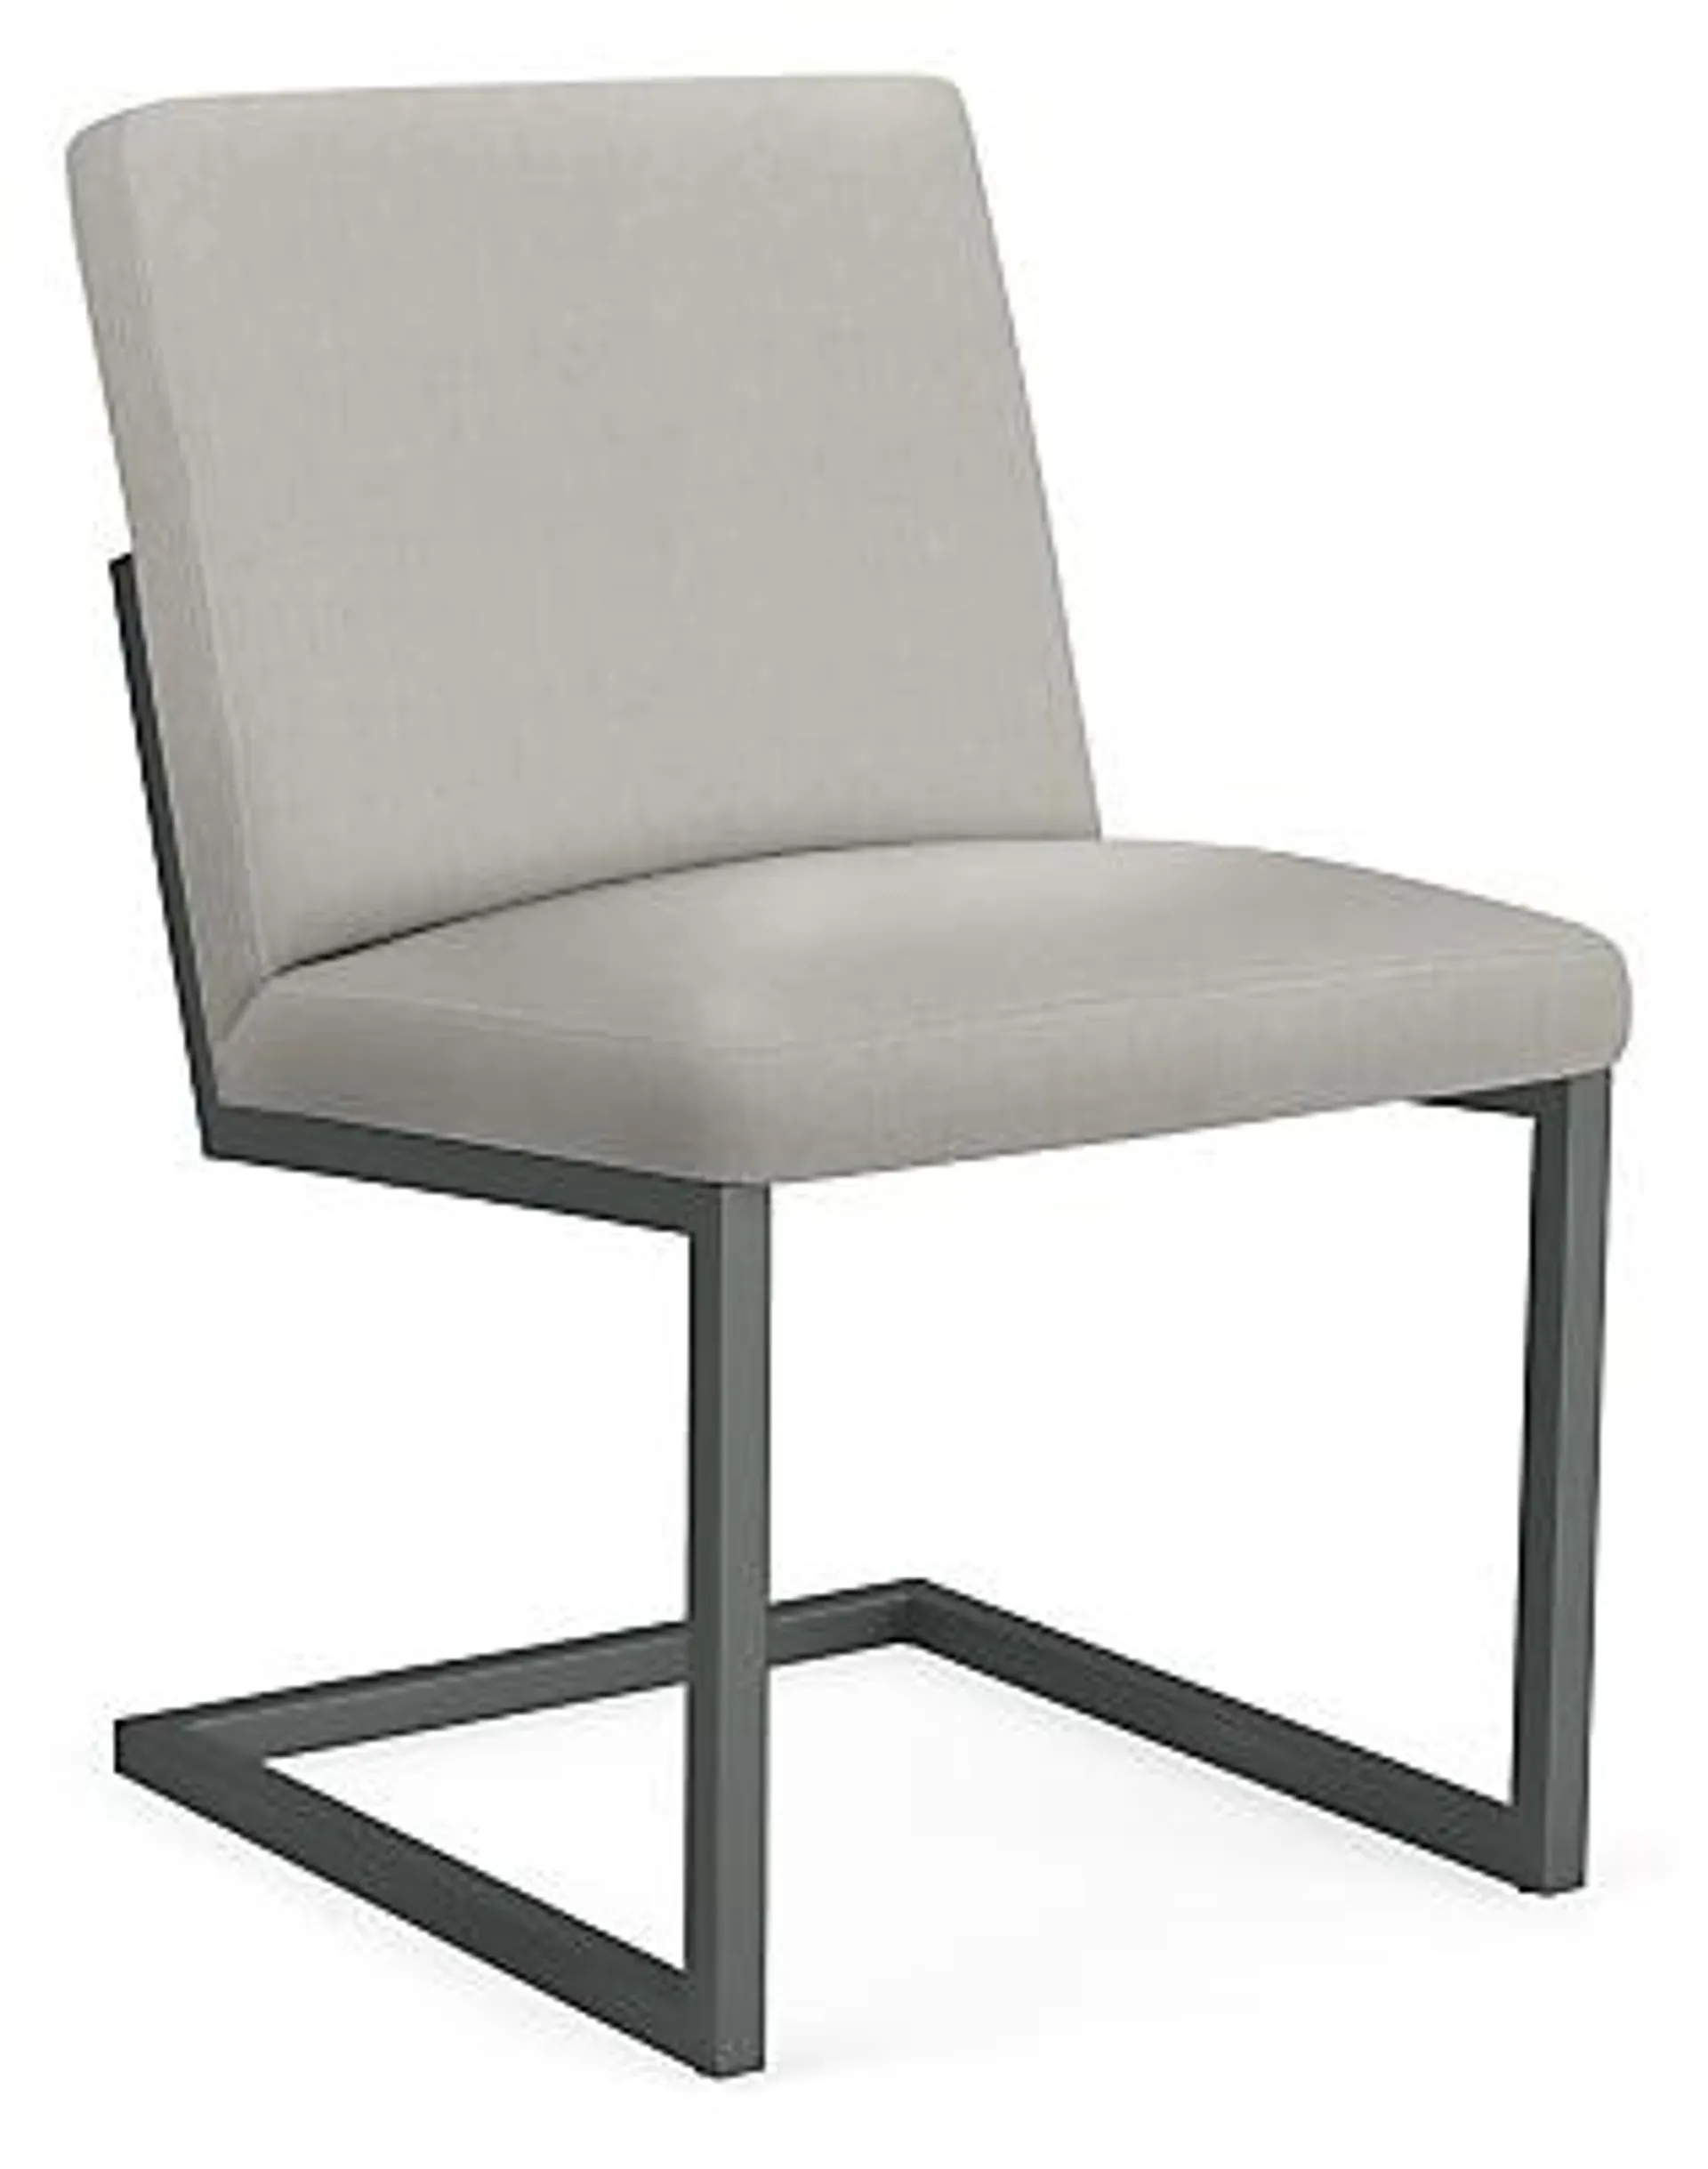 Finn Side Chair in Mist Grey with Graphite Frame